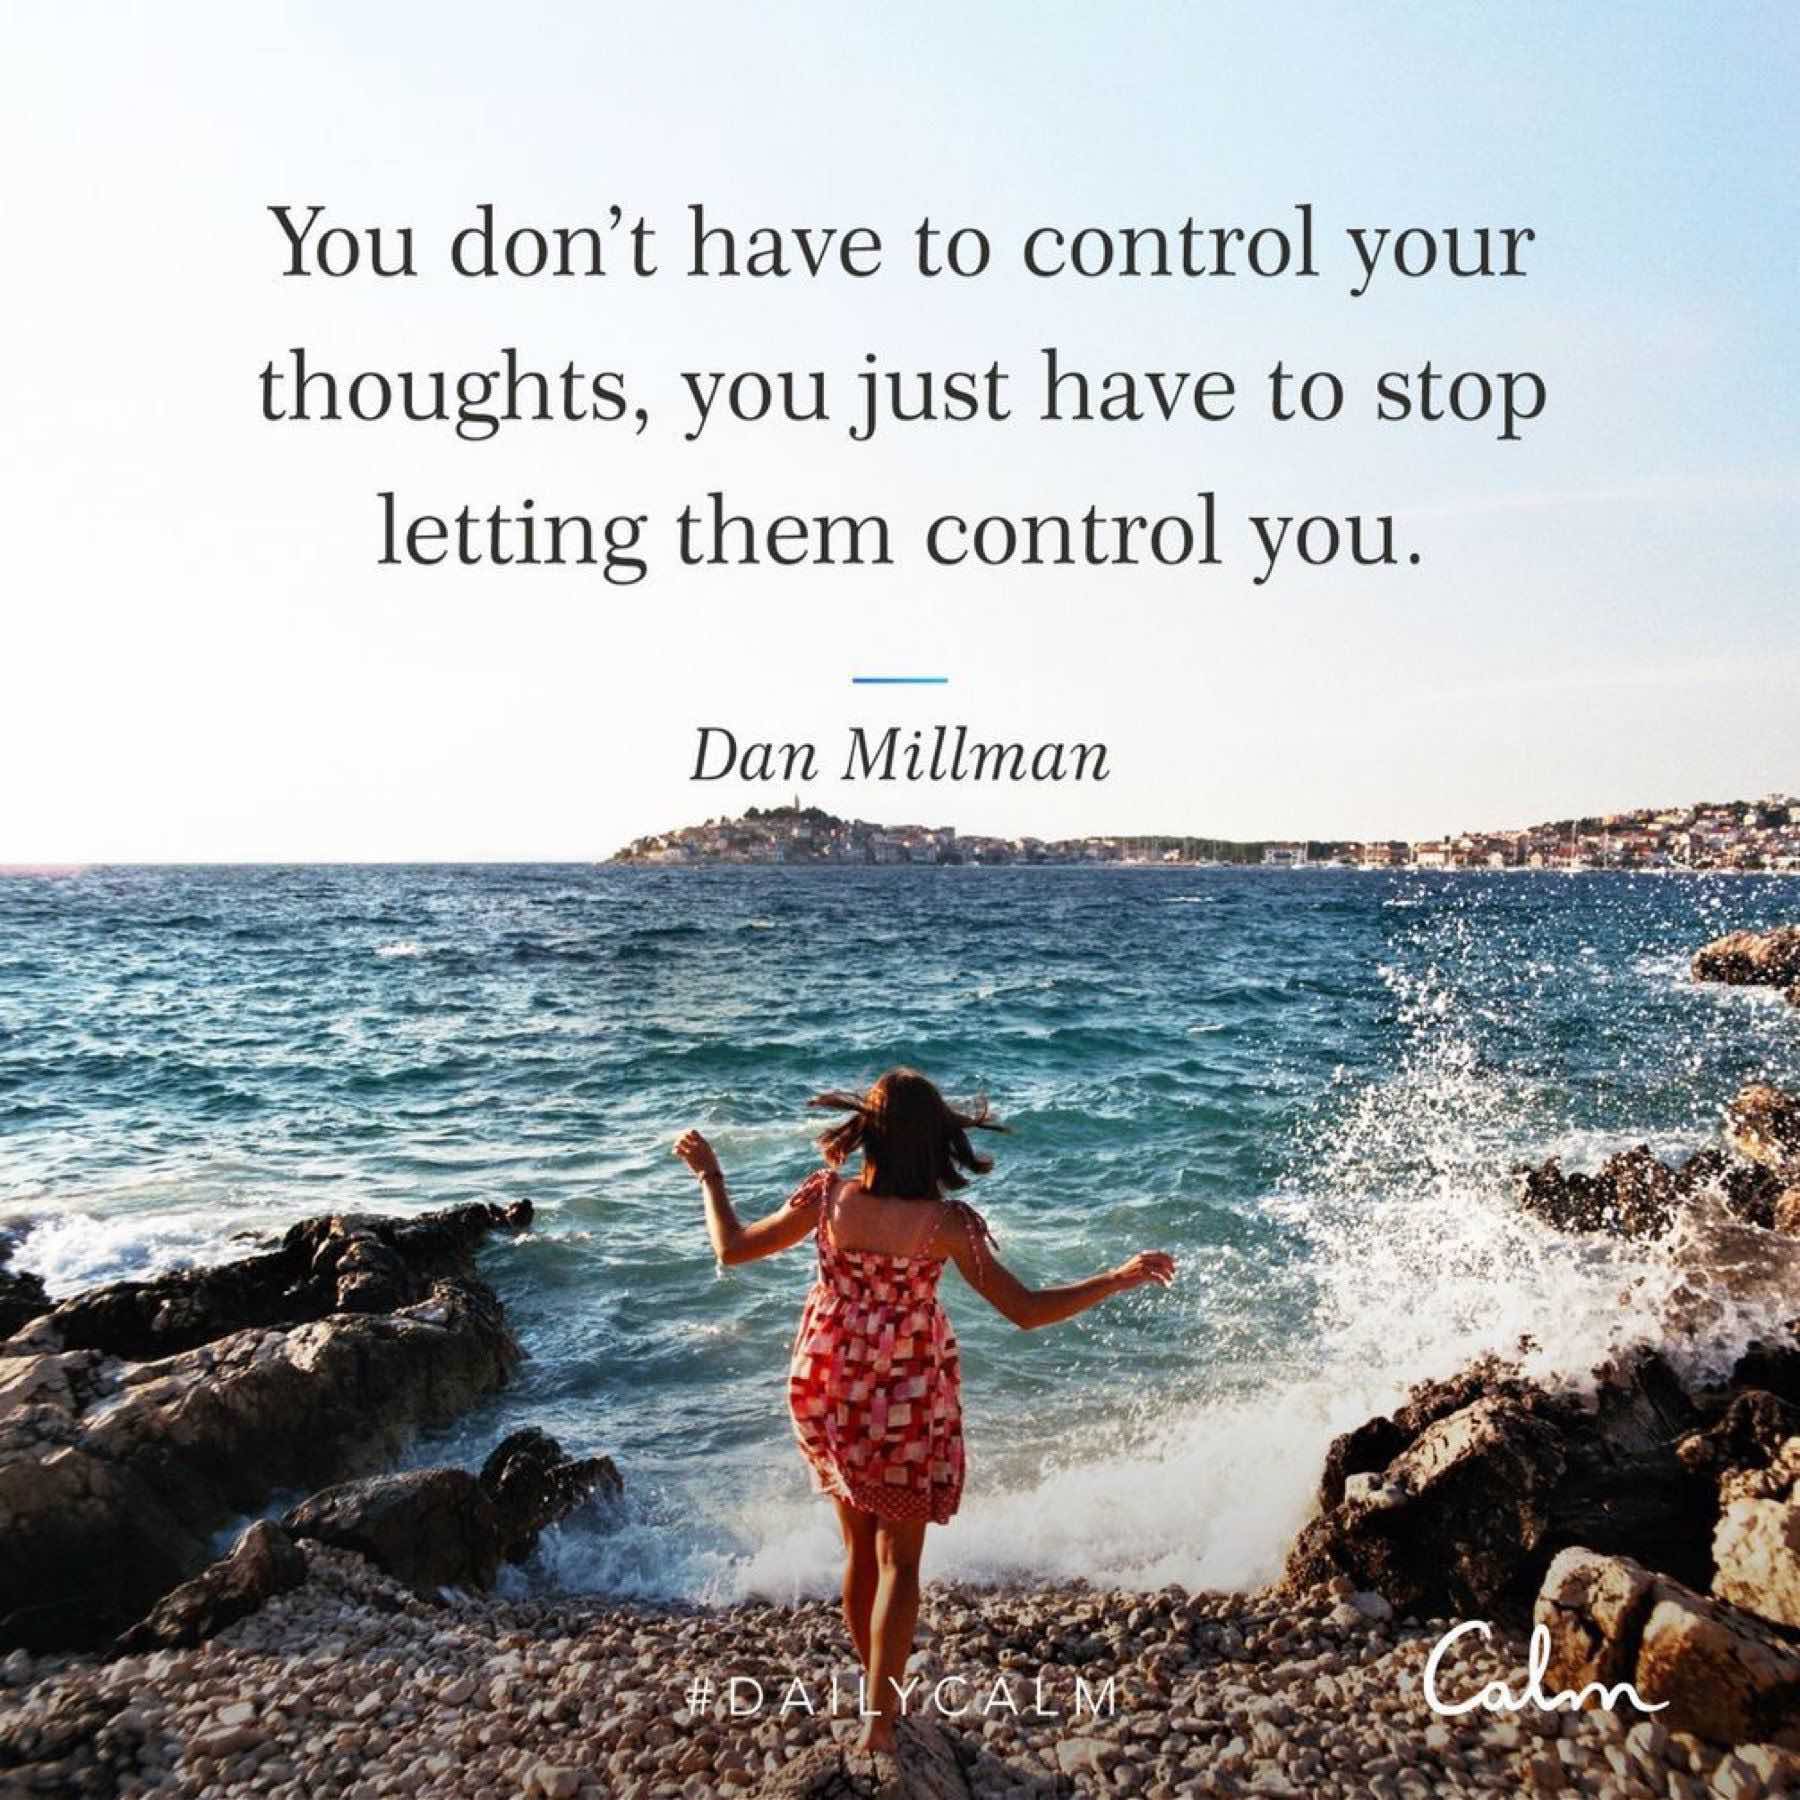 You don’t have to control your thoughts, you just have to stop letting them control you